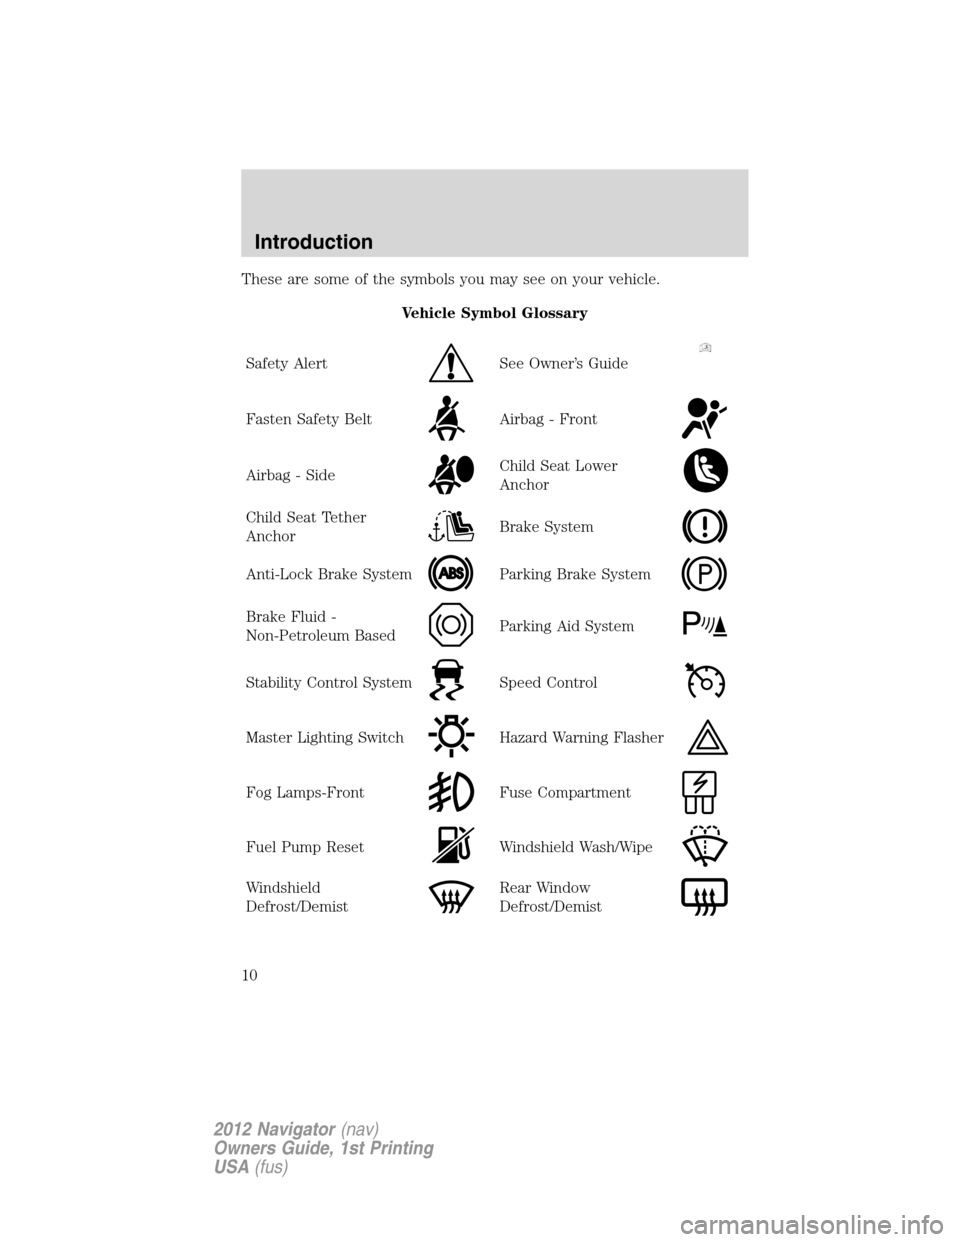 LINCOLN NAVIGATOR 2012  Navigation Manual These are some of the symbols you may see on your vehicle.
Vehicle Symbol Glossary
Safety Alert
See Owner’s Guide
Fasten Safety BeltAirbag - Front
Airbag - SideChild Seat Lower
Anchor
Child Seat Tet